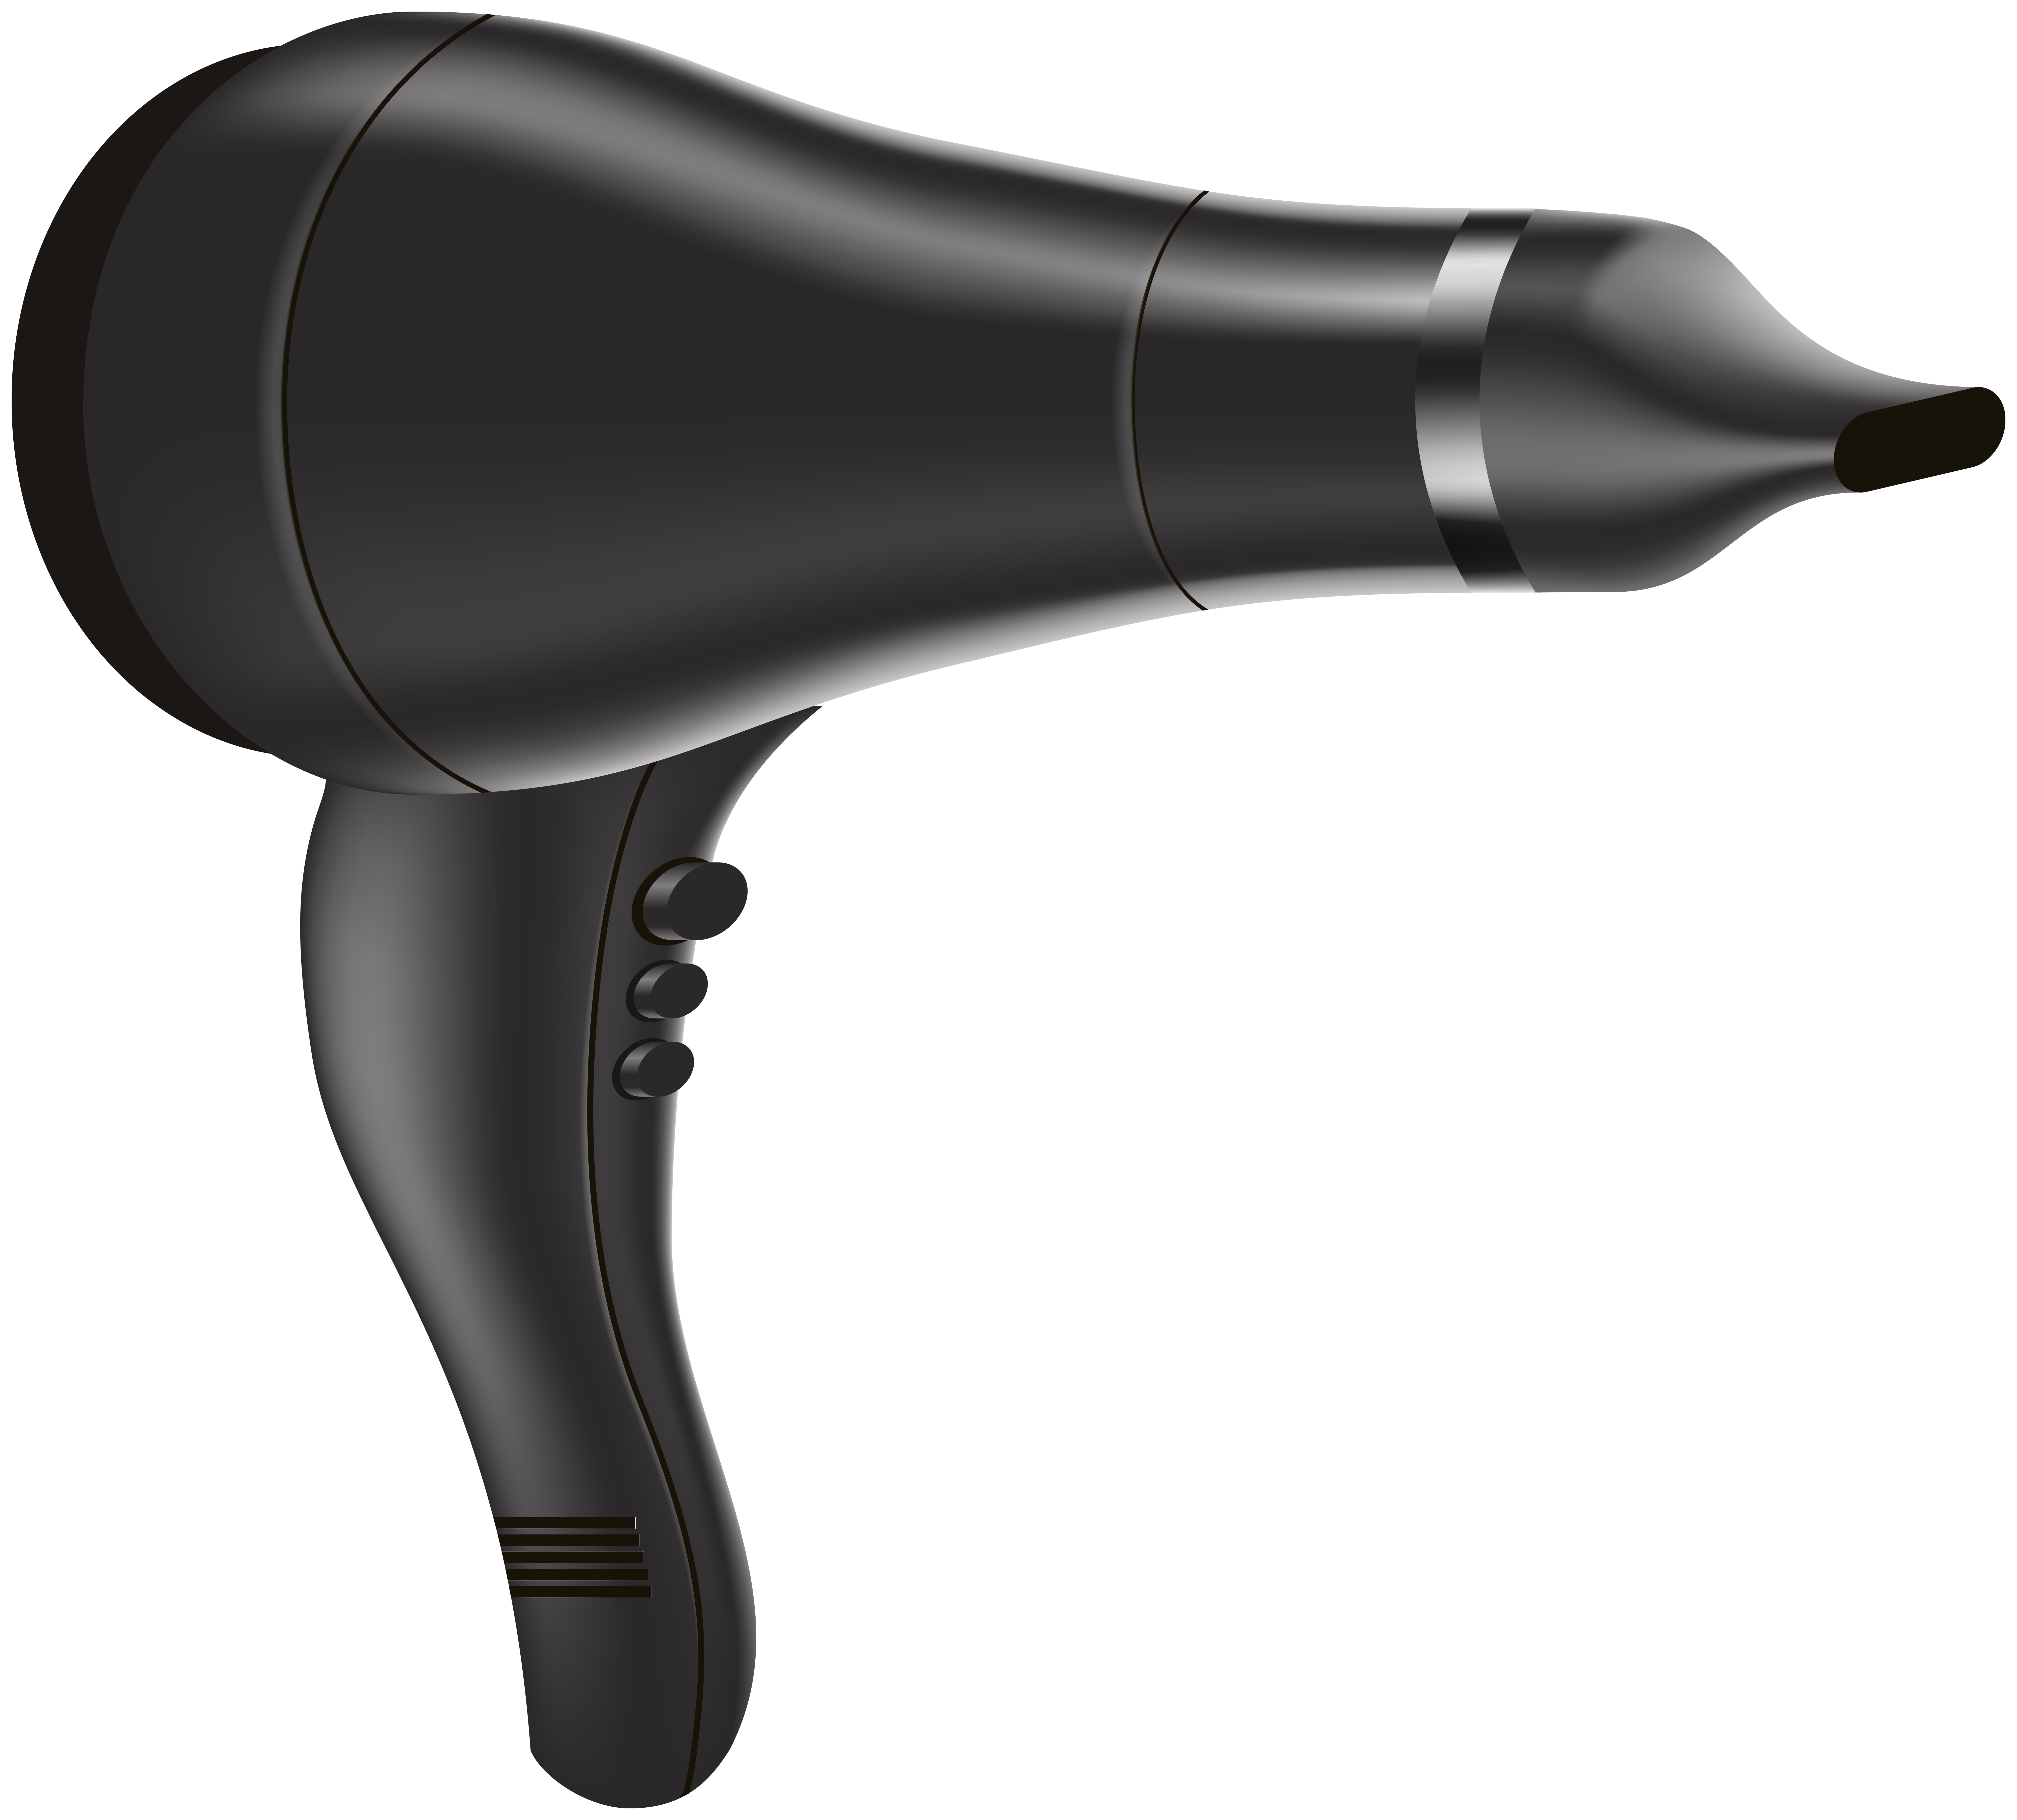 Hair Dryer Free Vector Illustration Material PNG Transparent Background And  Clipart Image For Free Download - Lovepik | 401265580